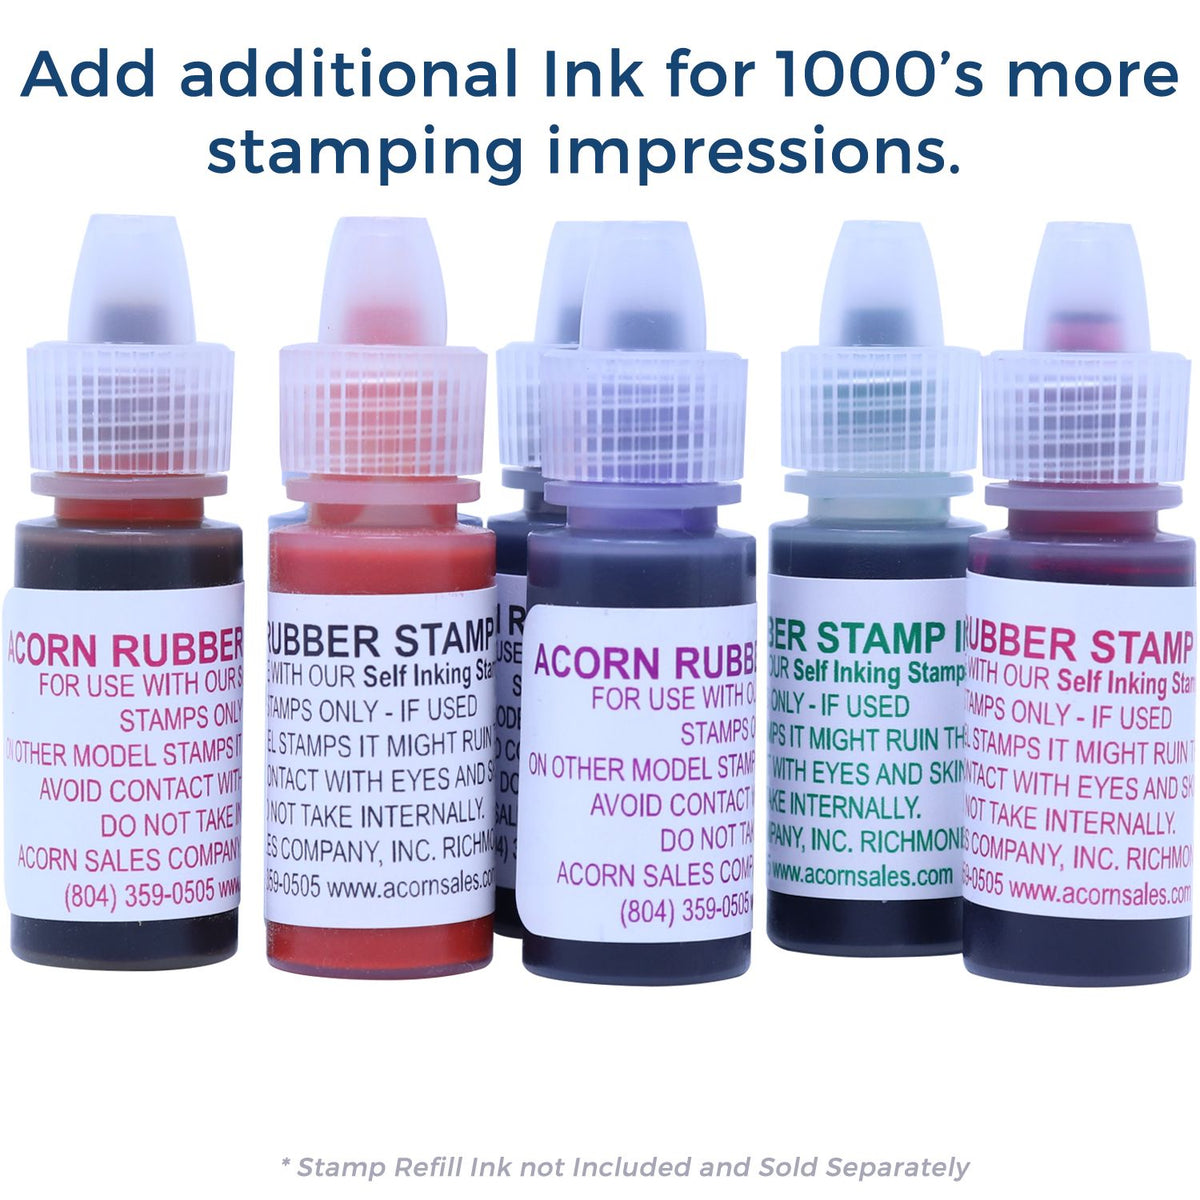 Refill Ink for Self-Inking Round Copy Stamp Available